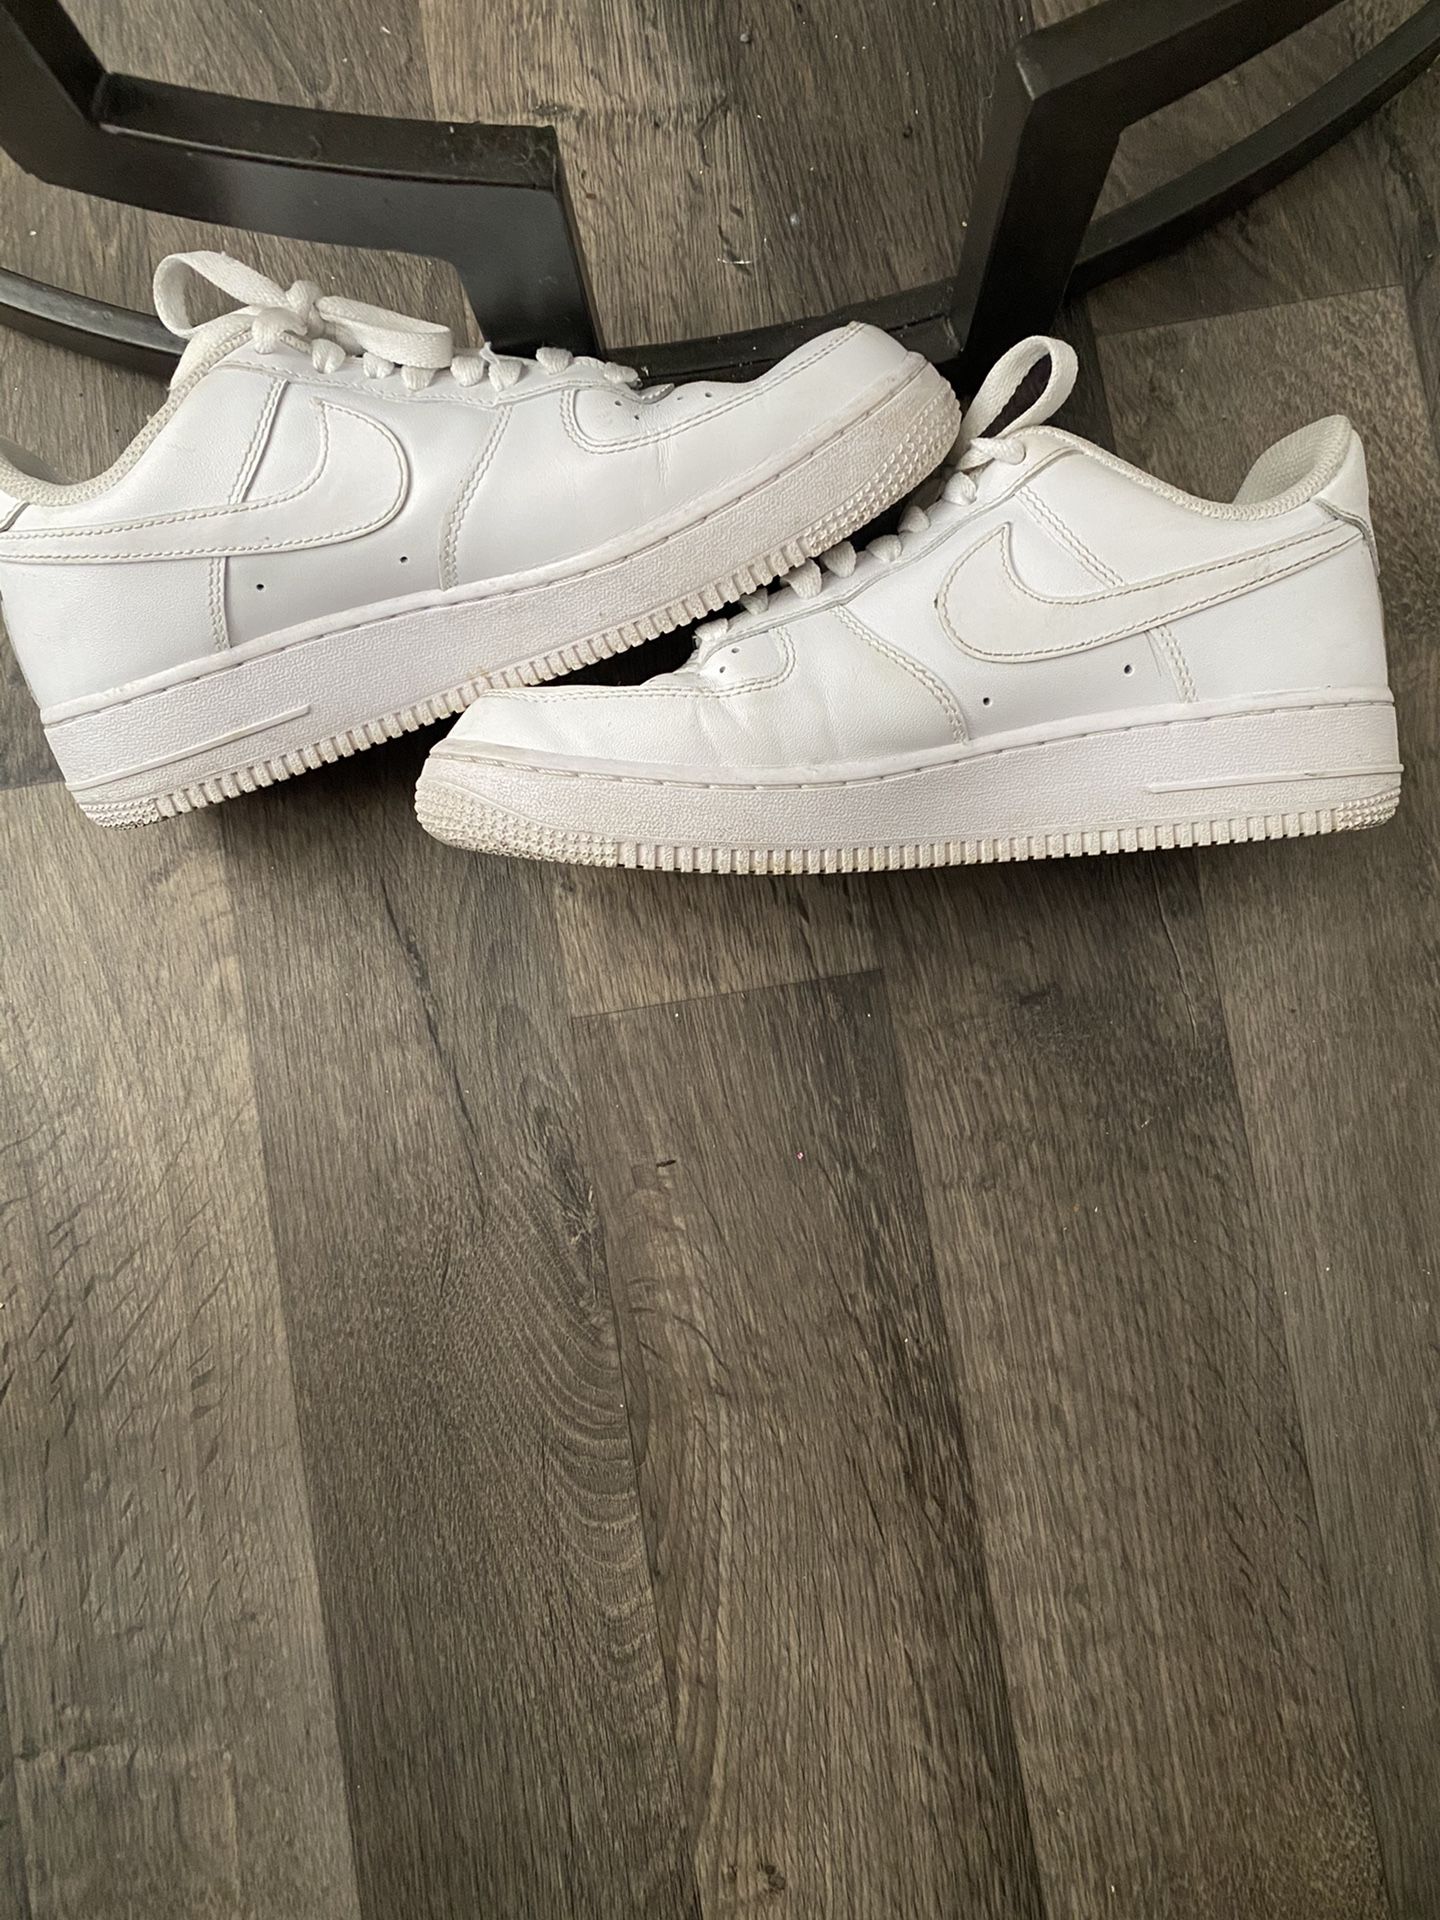 Used Nike Airforce 1s